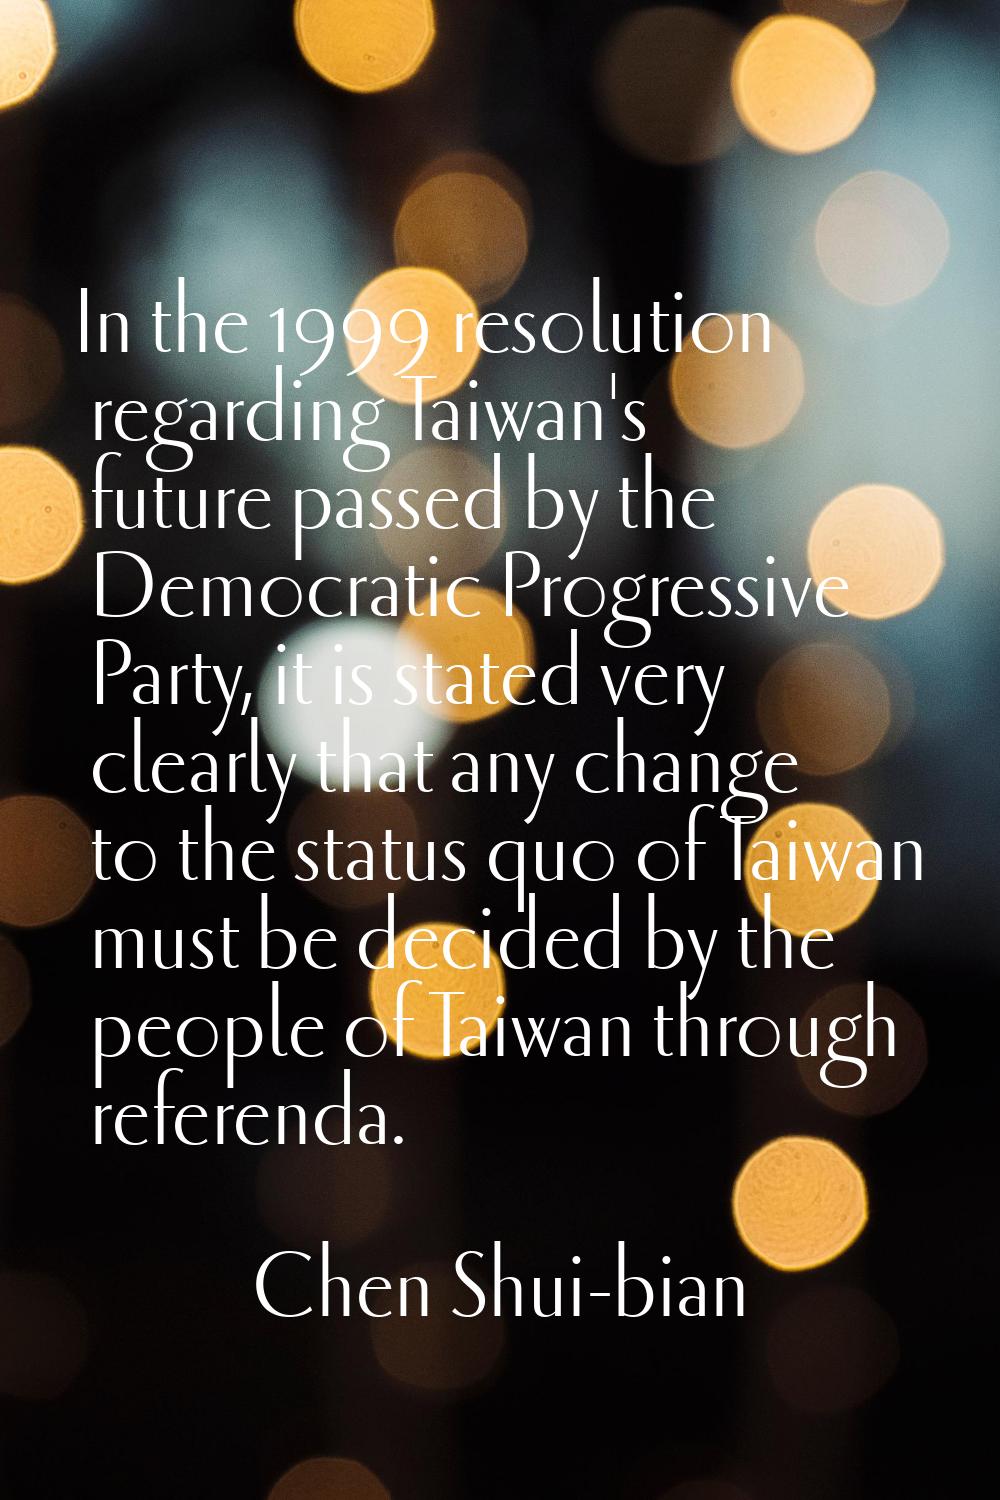 In the 1999 resolution regarding Taiwan's future passed by the Democratic Progressive Party, it is 